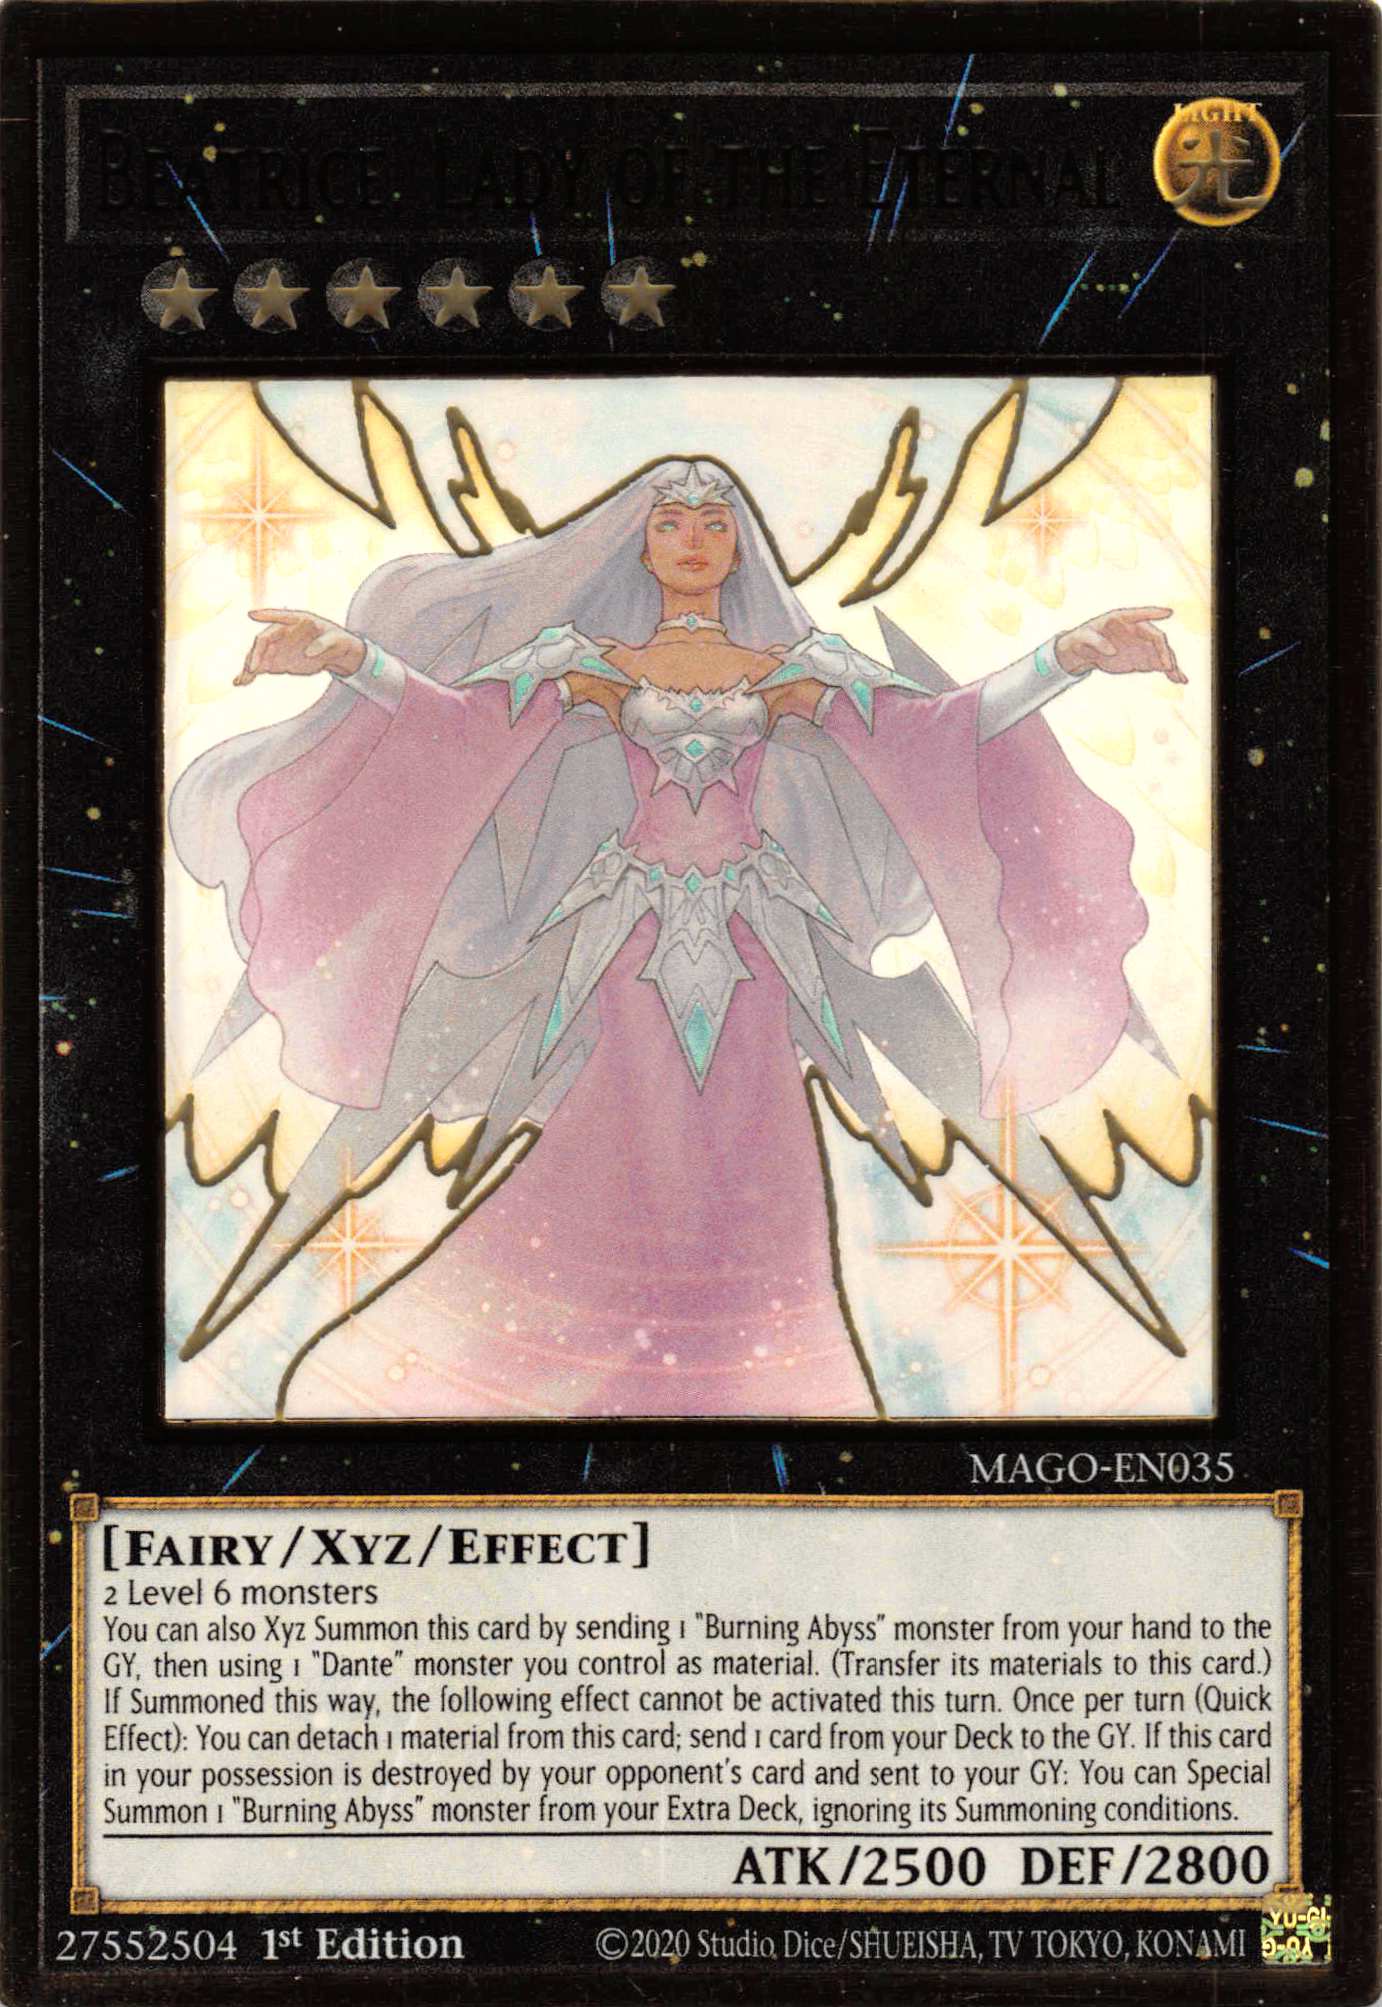 Beatrice, Lady of the Eternal [MAGO-EN035] Gold Rare